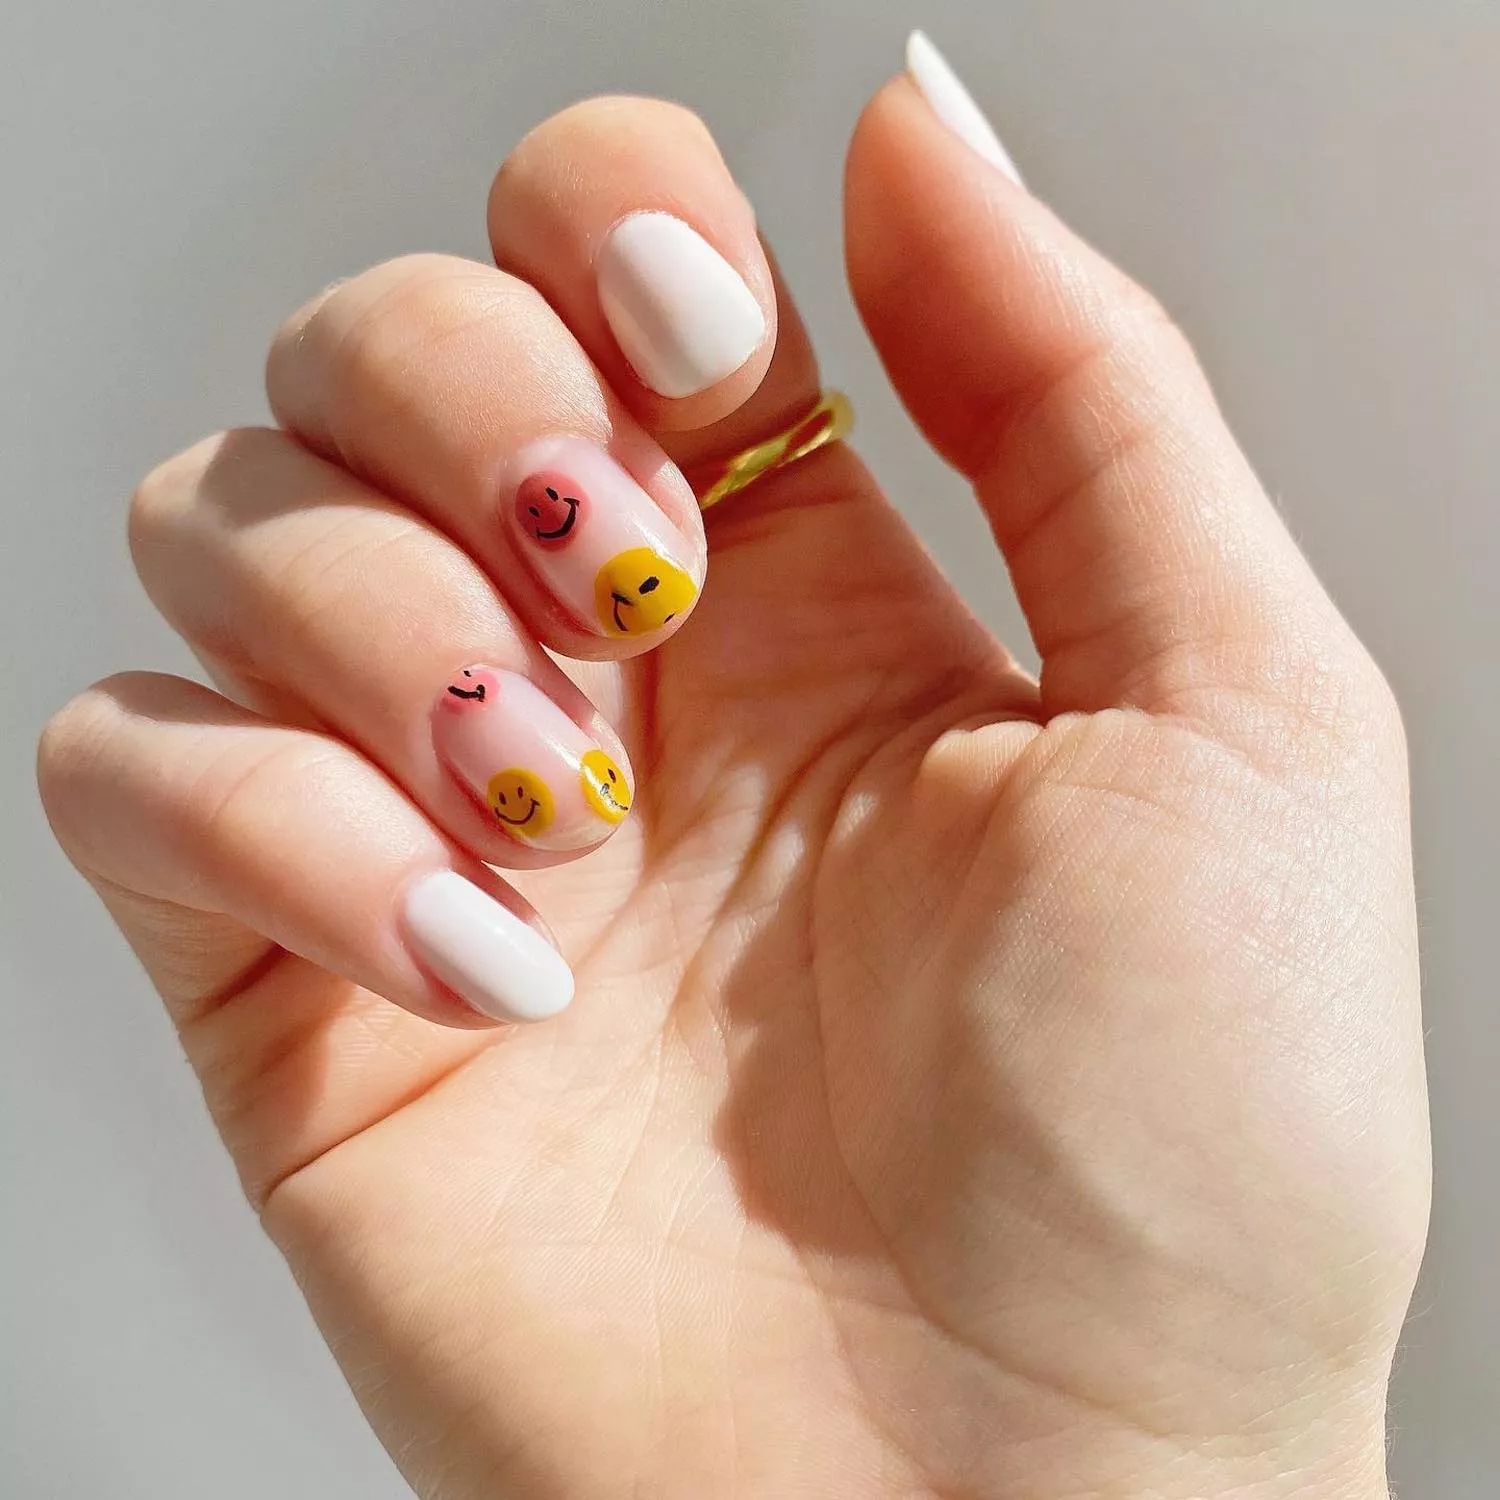 Manicure with white base and pink and yellow smiley face accent designs